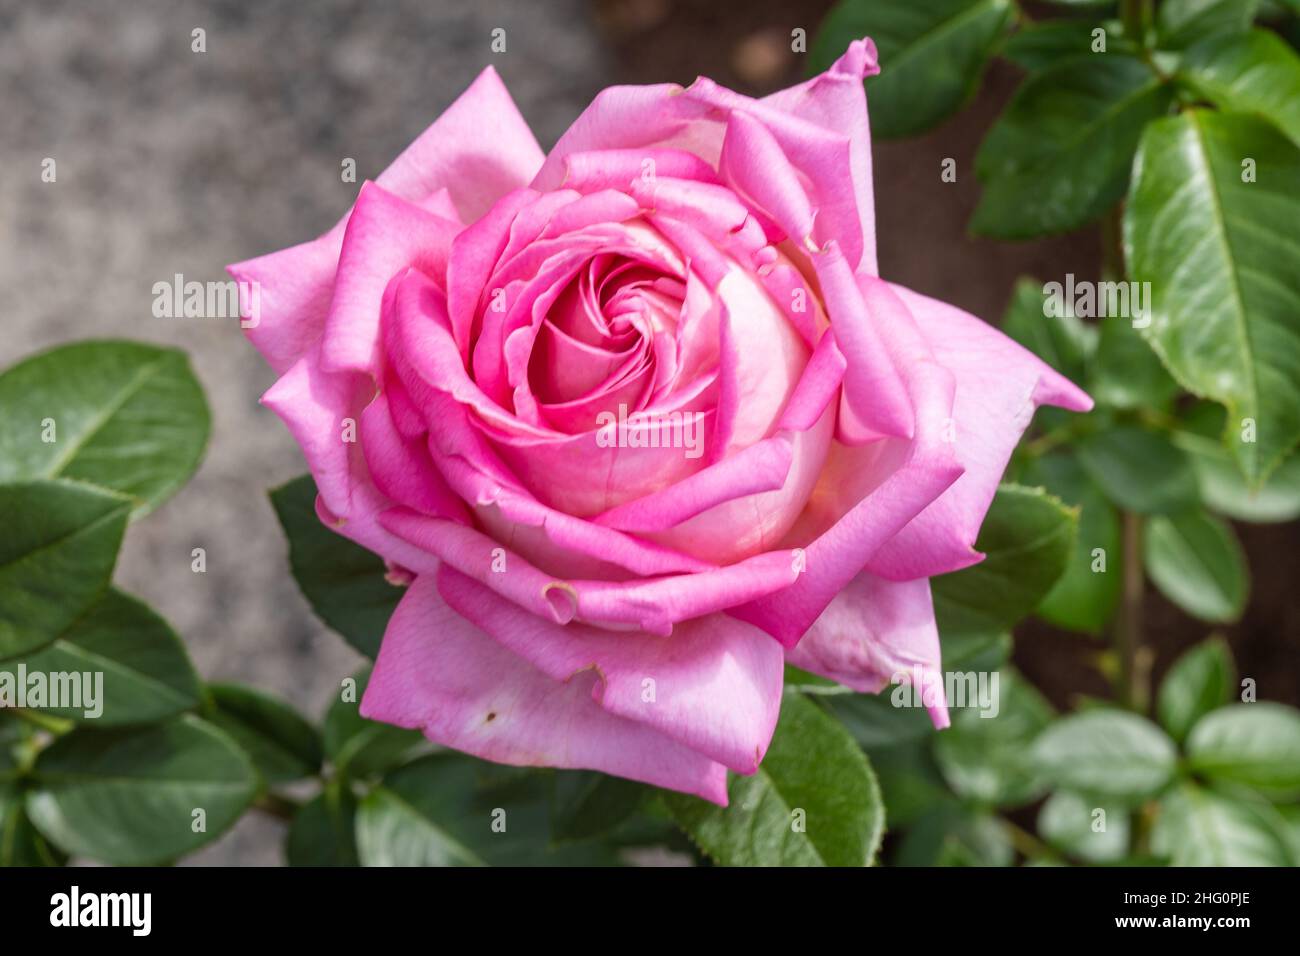 Gallic rose (Rosa gallica) is a species of flowering plant in the rose family, native to southern and central Europe eastwards to Turkey and the Cauca Stock Photo